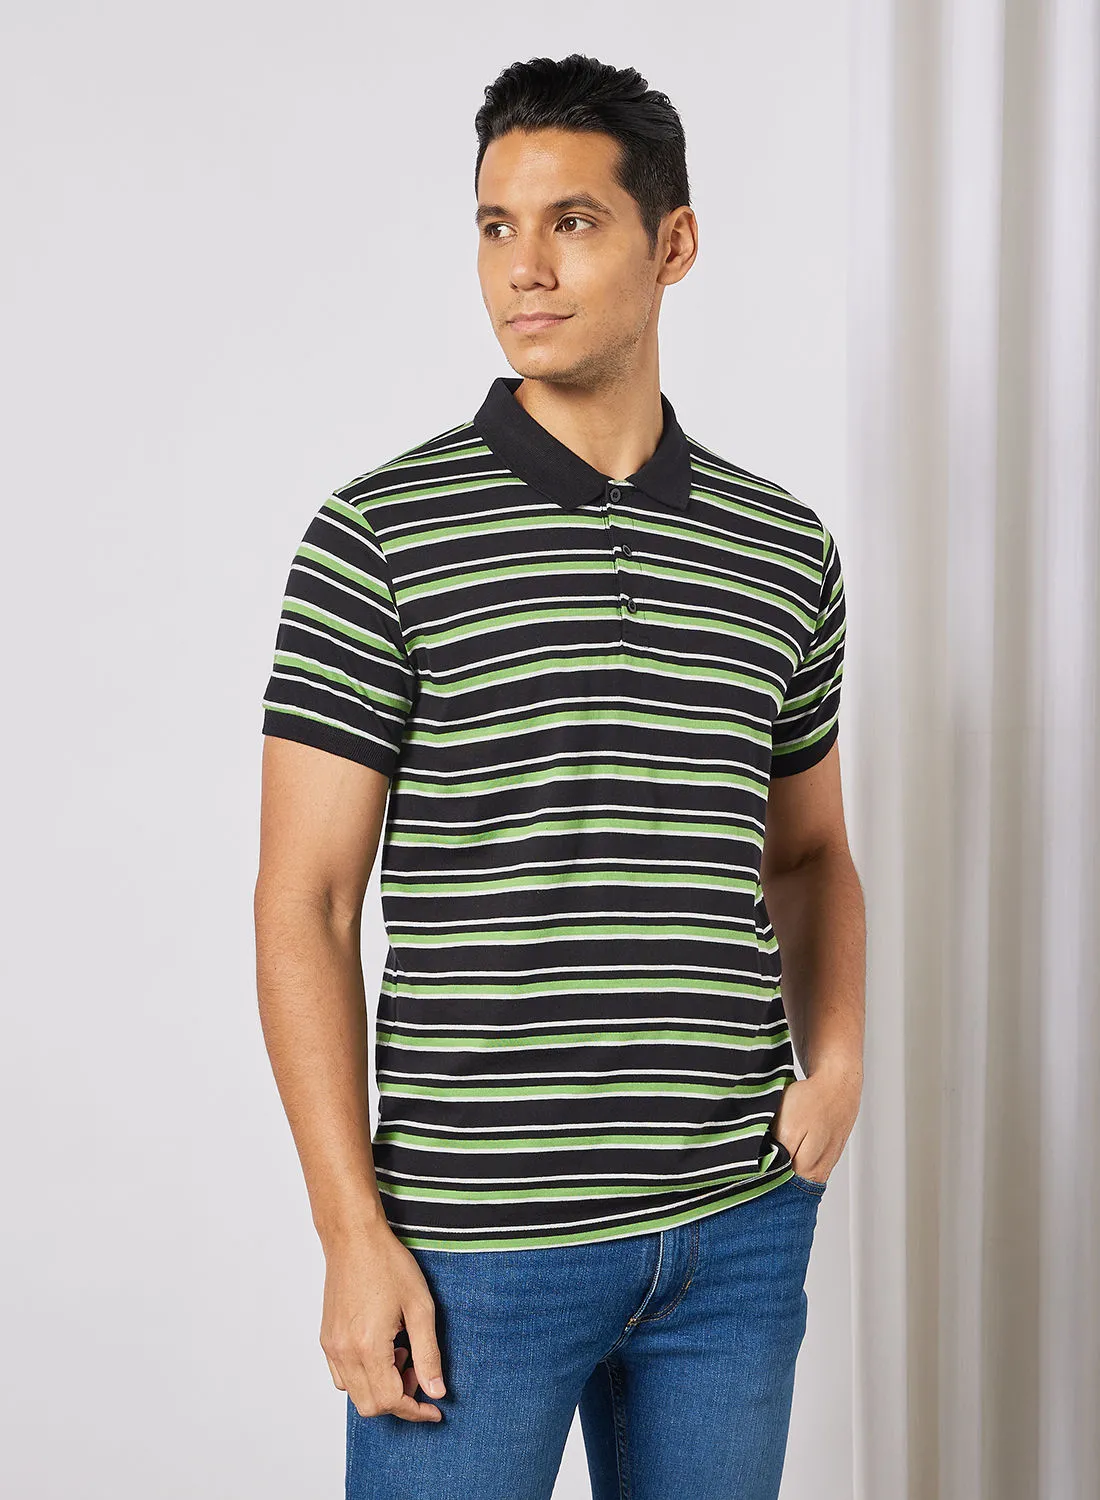 Noon East Men's Basic Casual Polo T-Shirt with Stripe design in Regular Fit Half Sleeves Multicolour